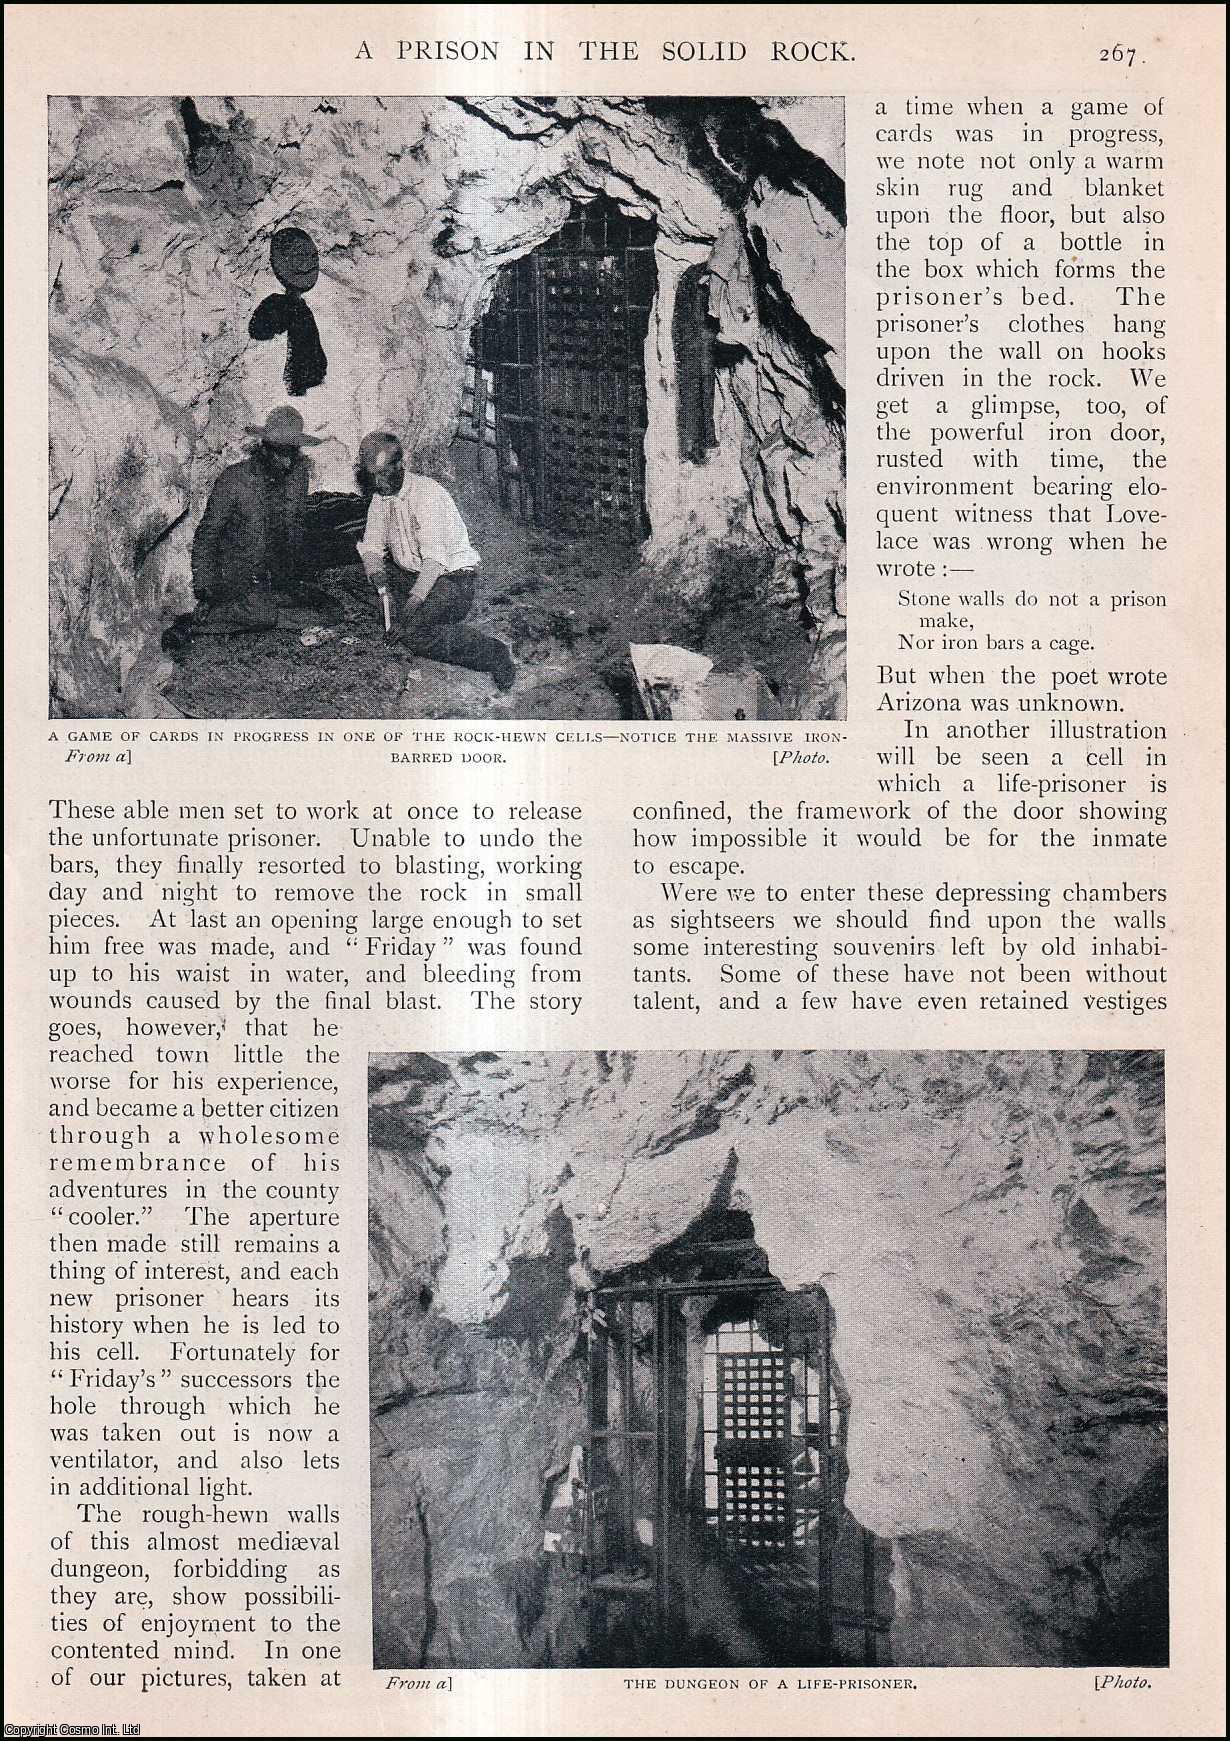 Theodore Adams - A Prison in the Solid Rock, Clifton, Arizona : Catacombs & Dungeons where inmates got no light. An uncommon original article from the Wide World Magazine, 1904.